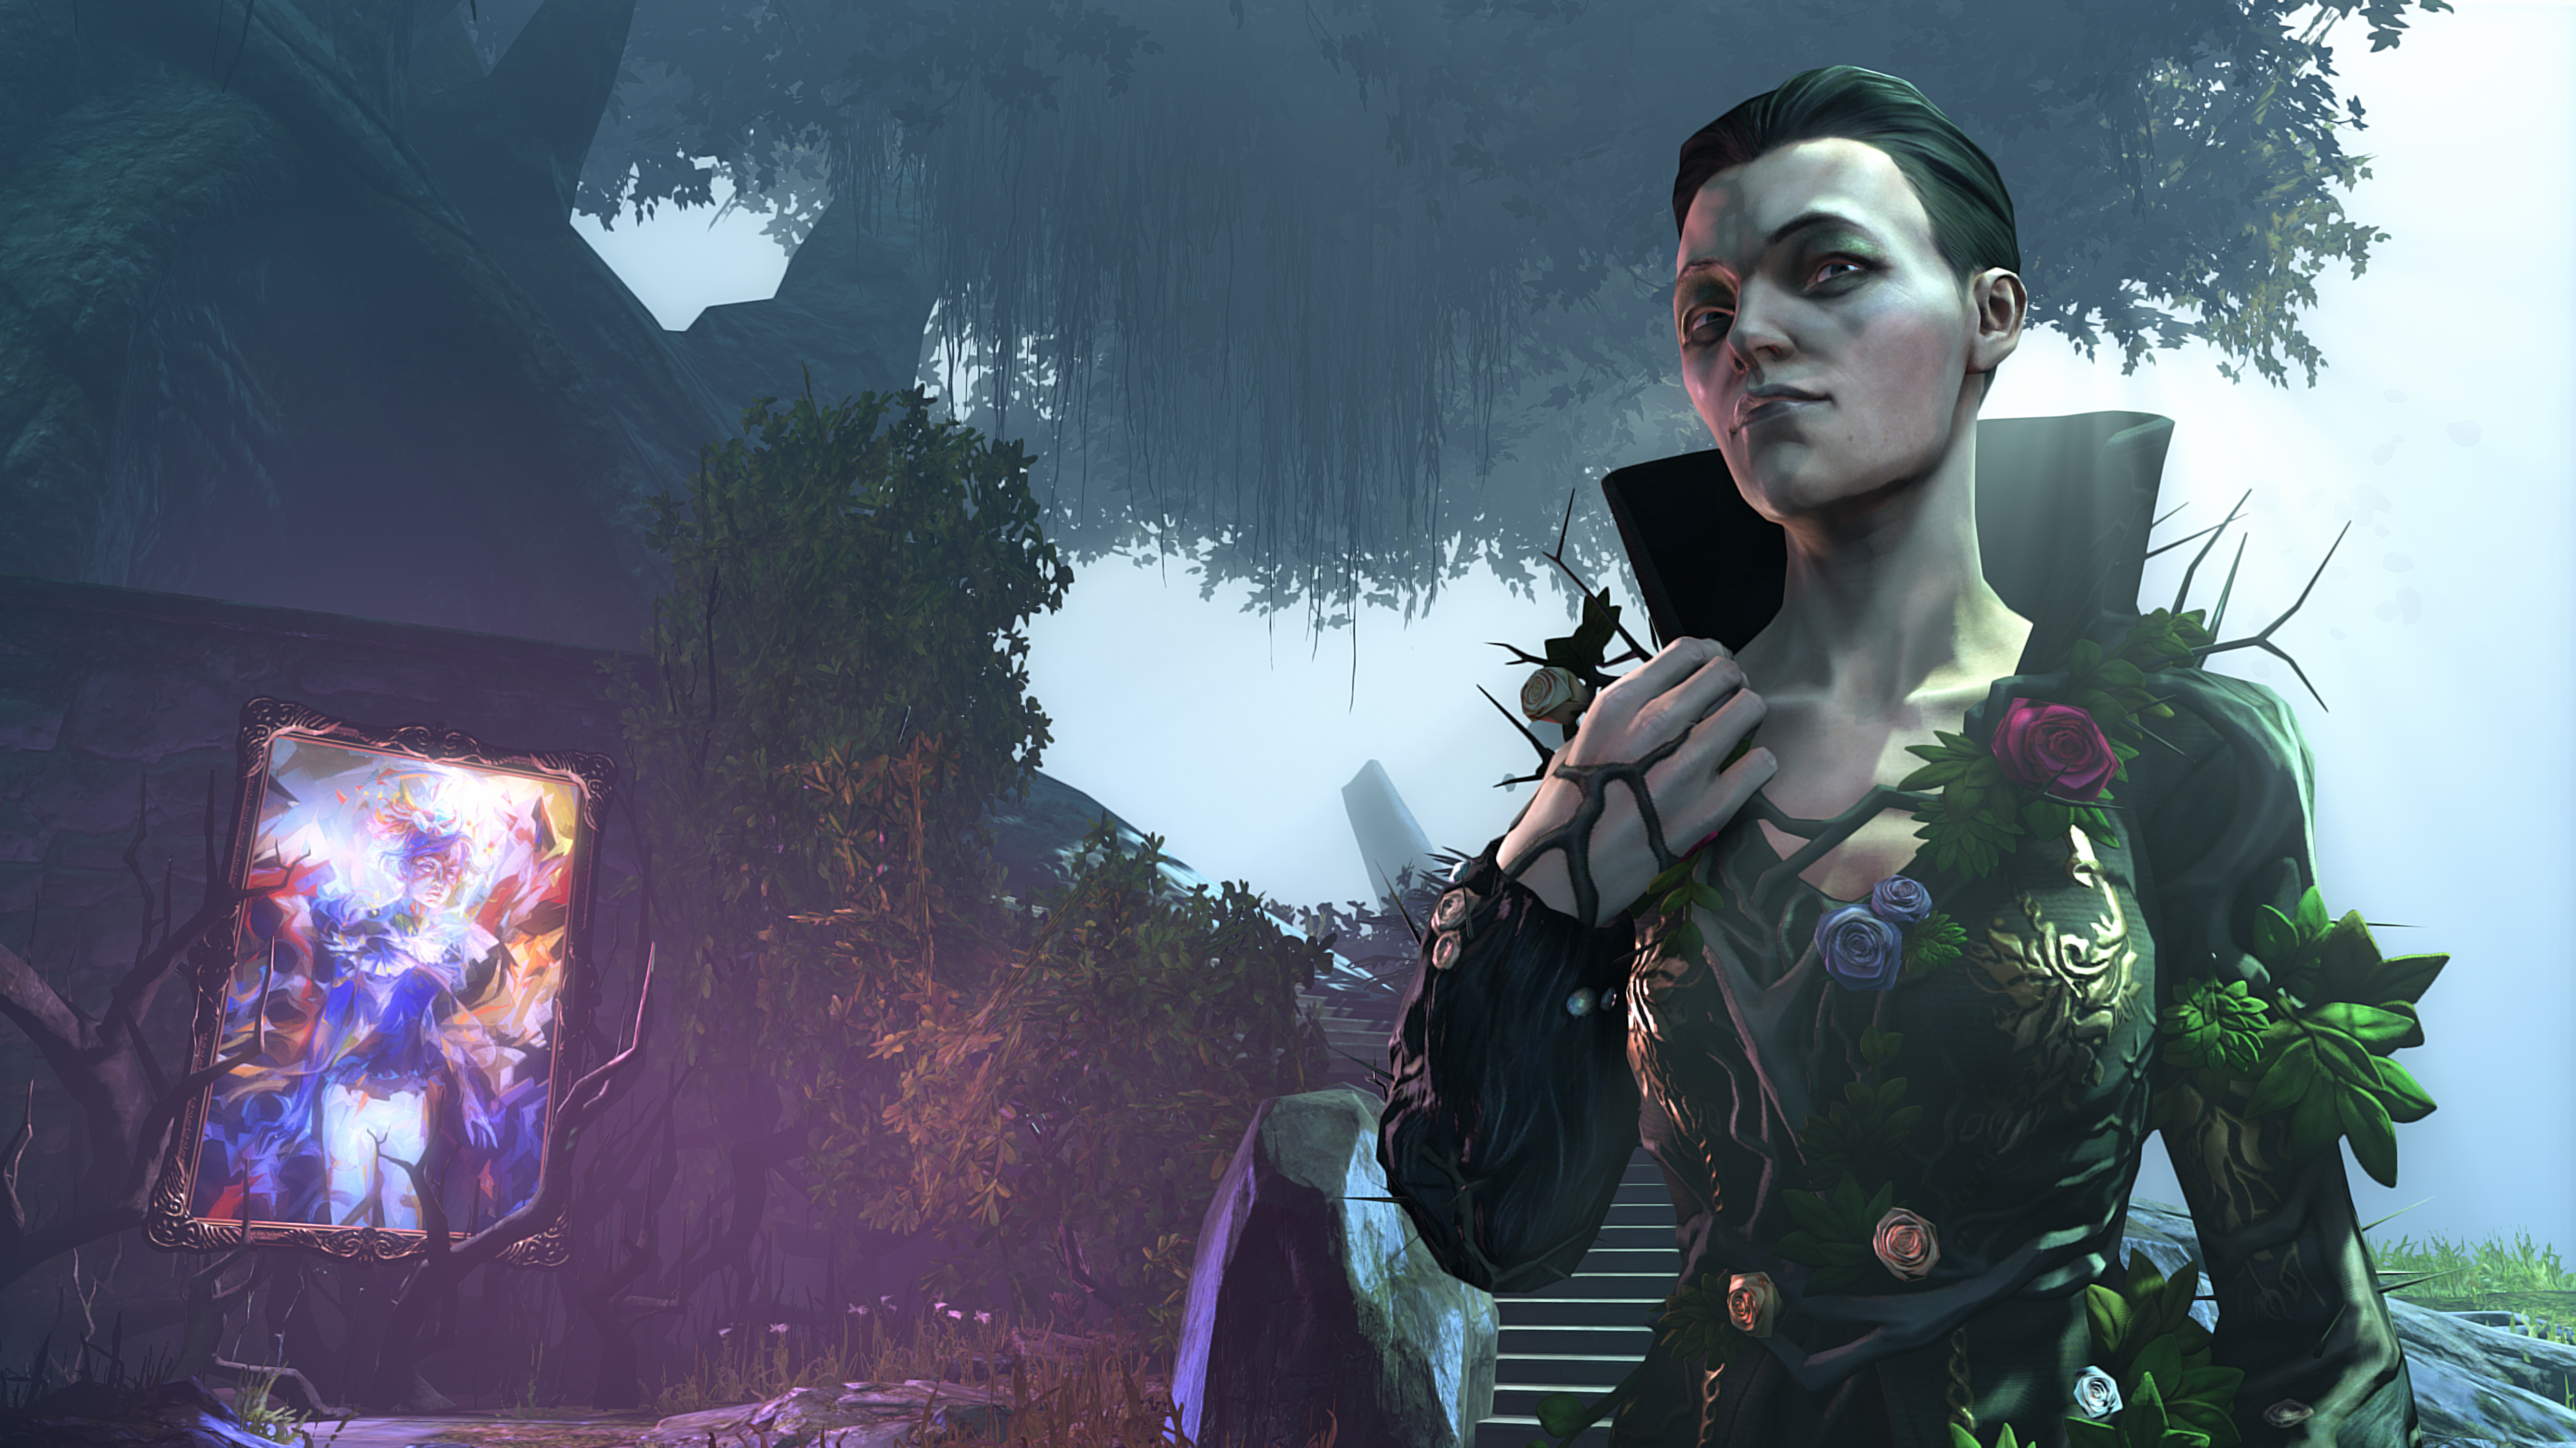 Dishonored The Brigmore Witches 7656x4304